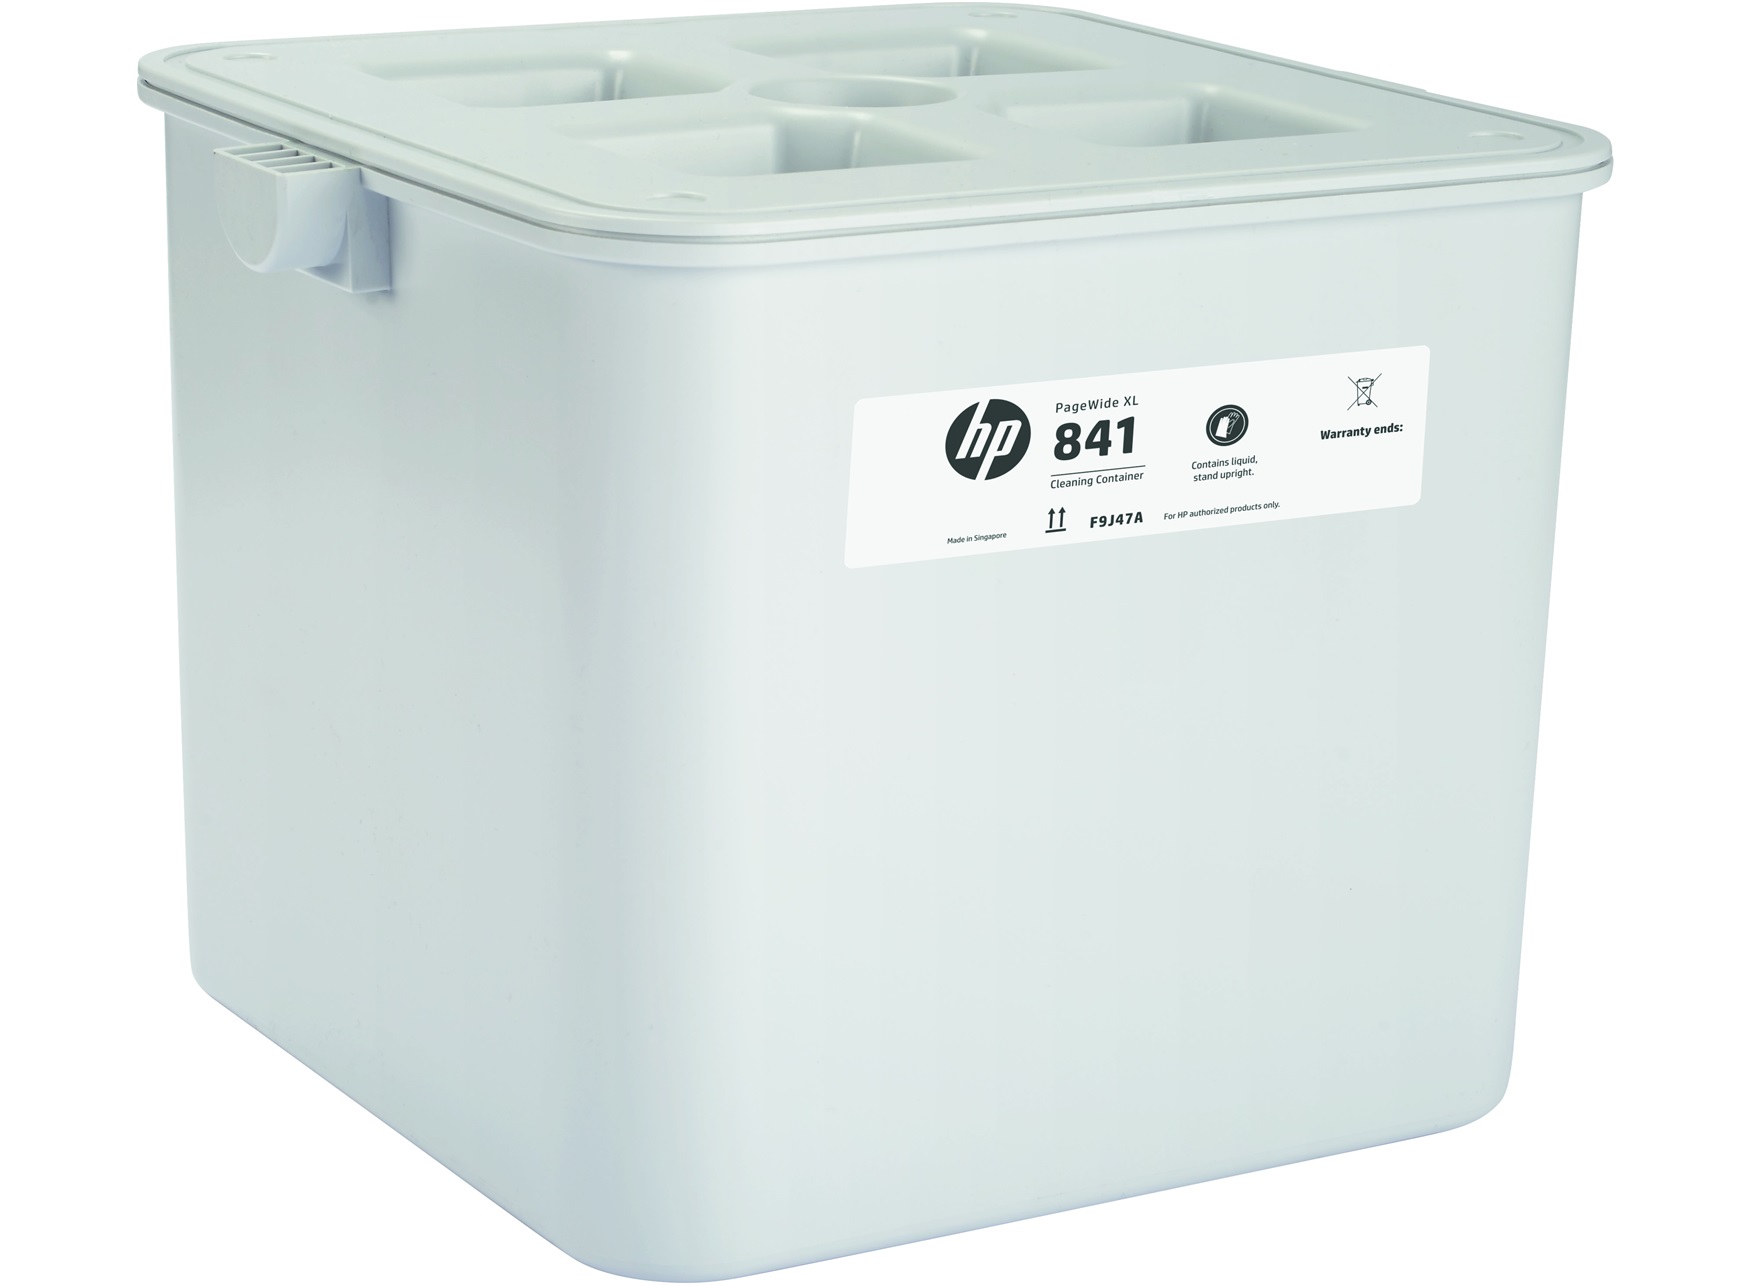 Cleaning Container HP 841 PageWide XL